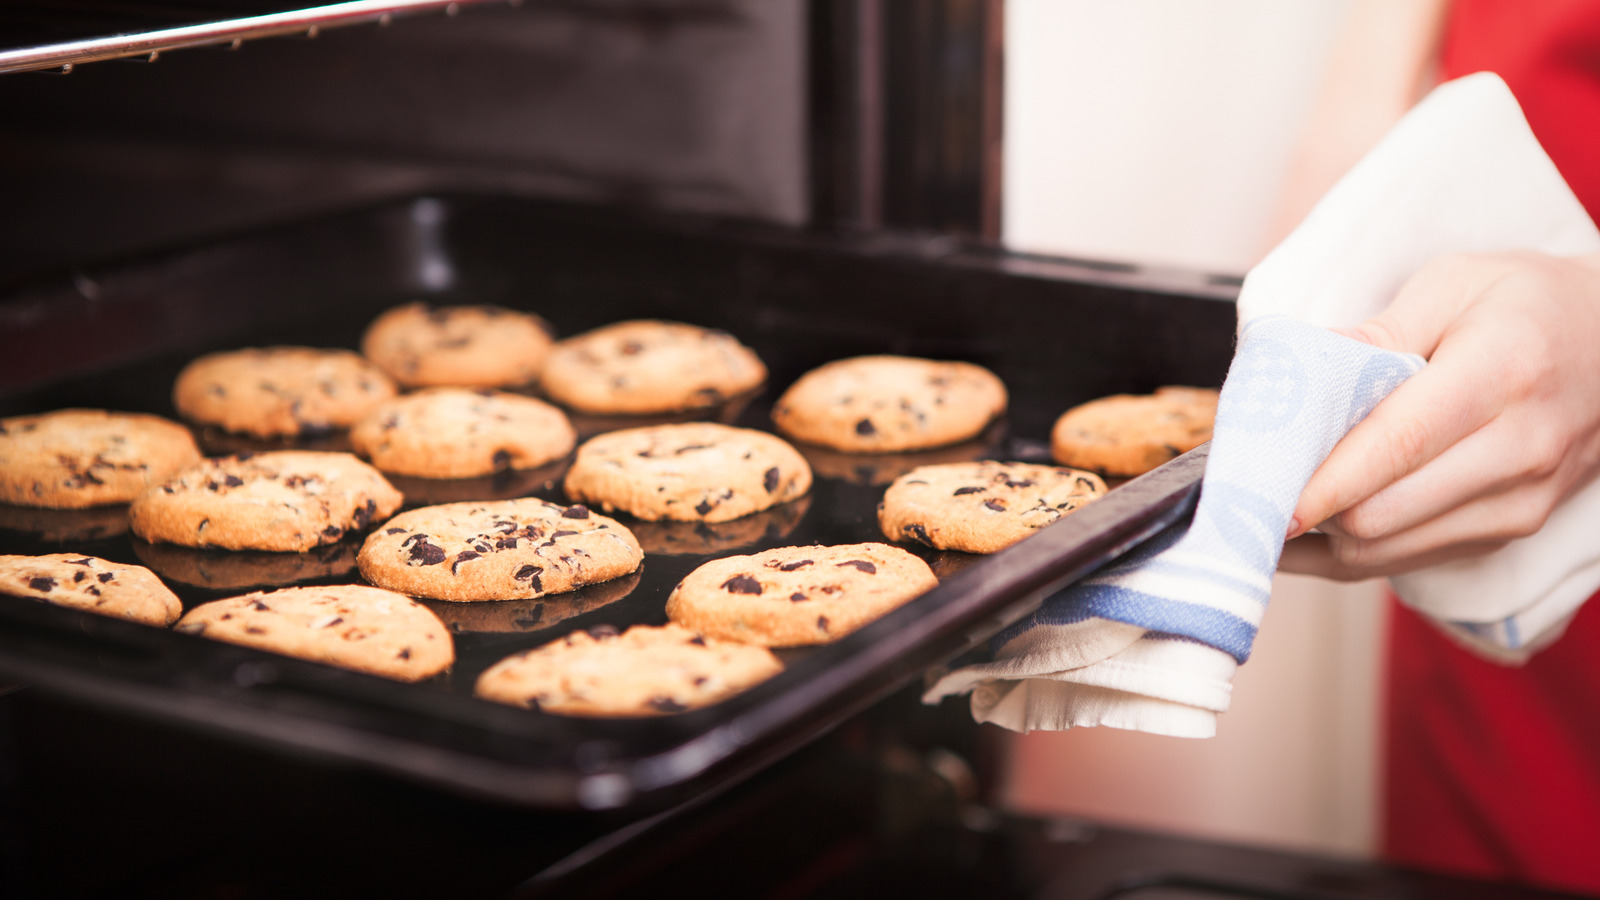 Which Oven Rack Should You Use To Bake Cookies?